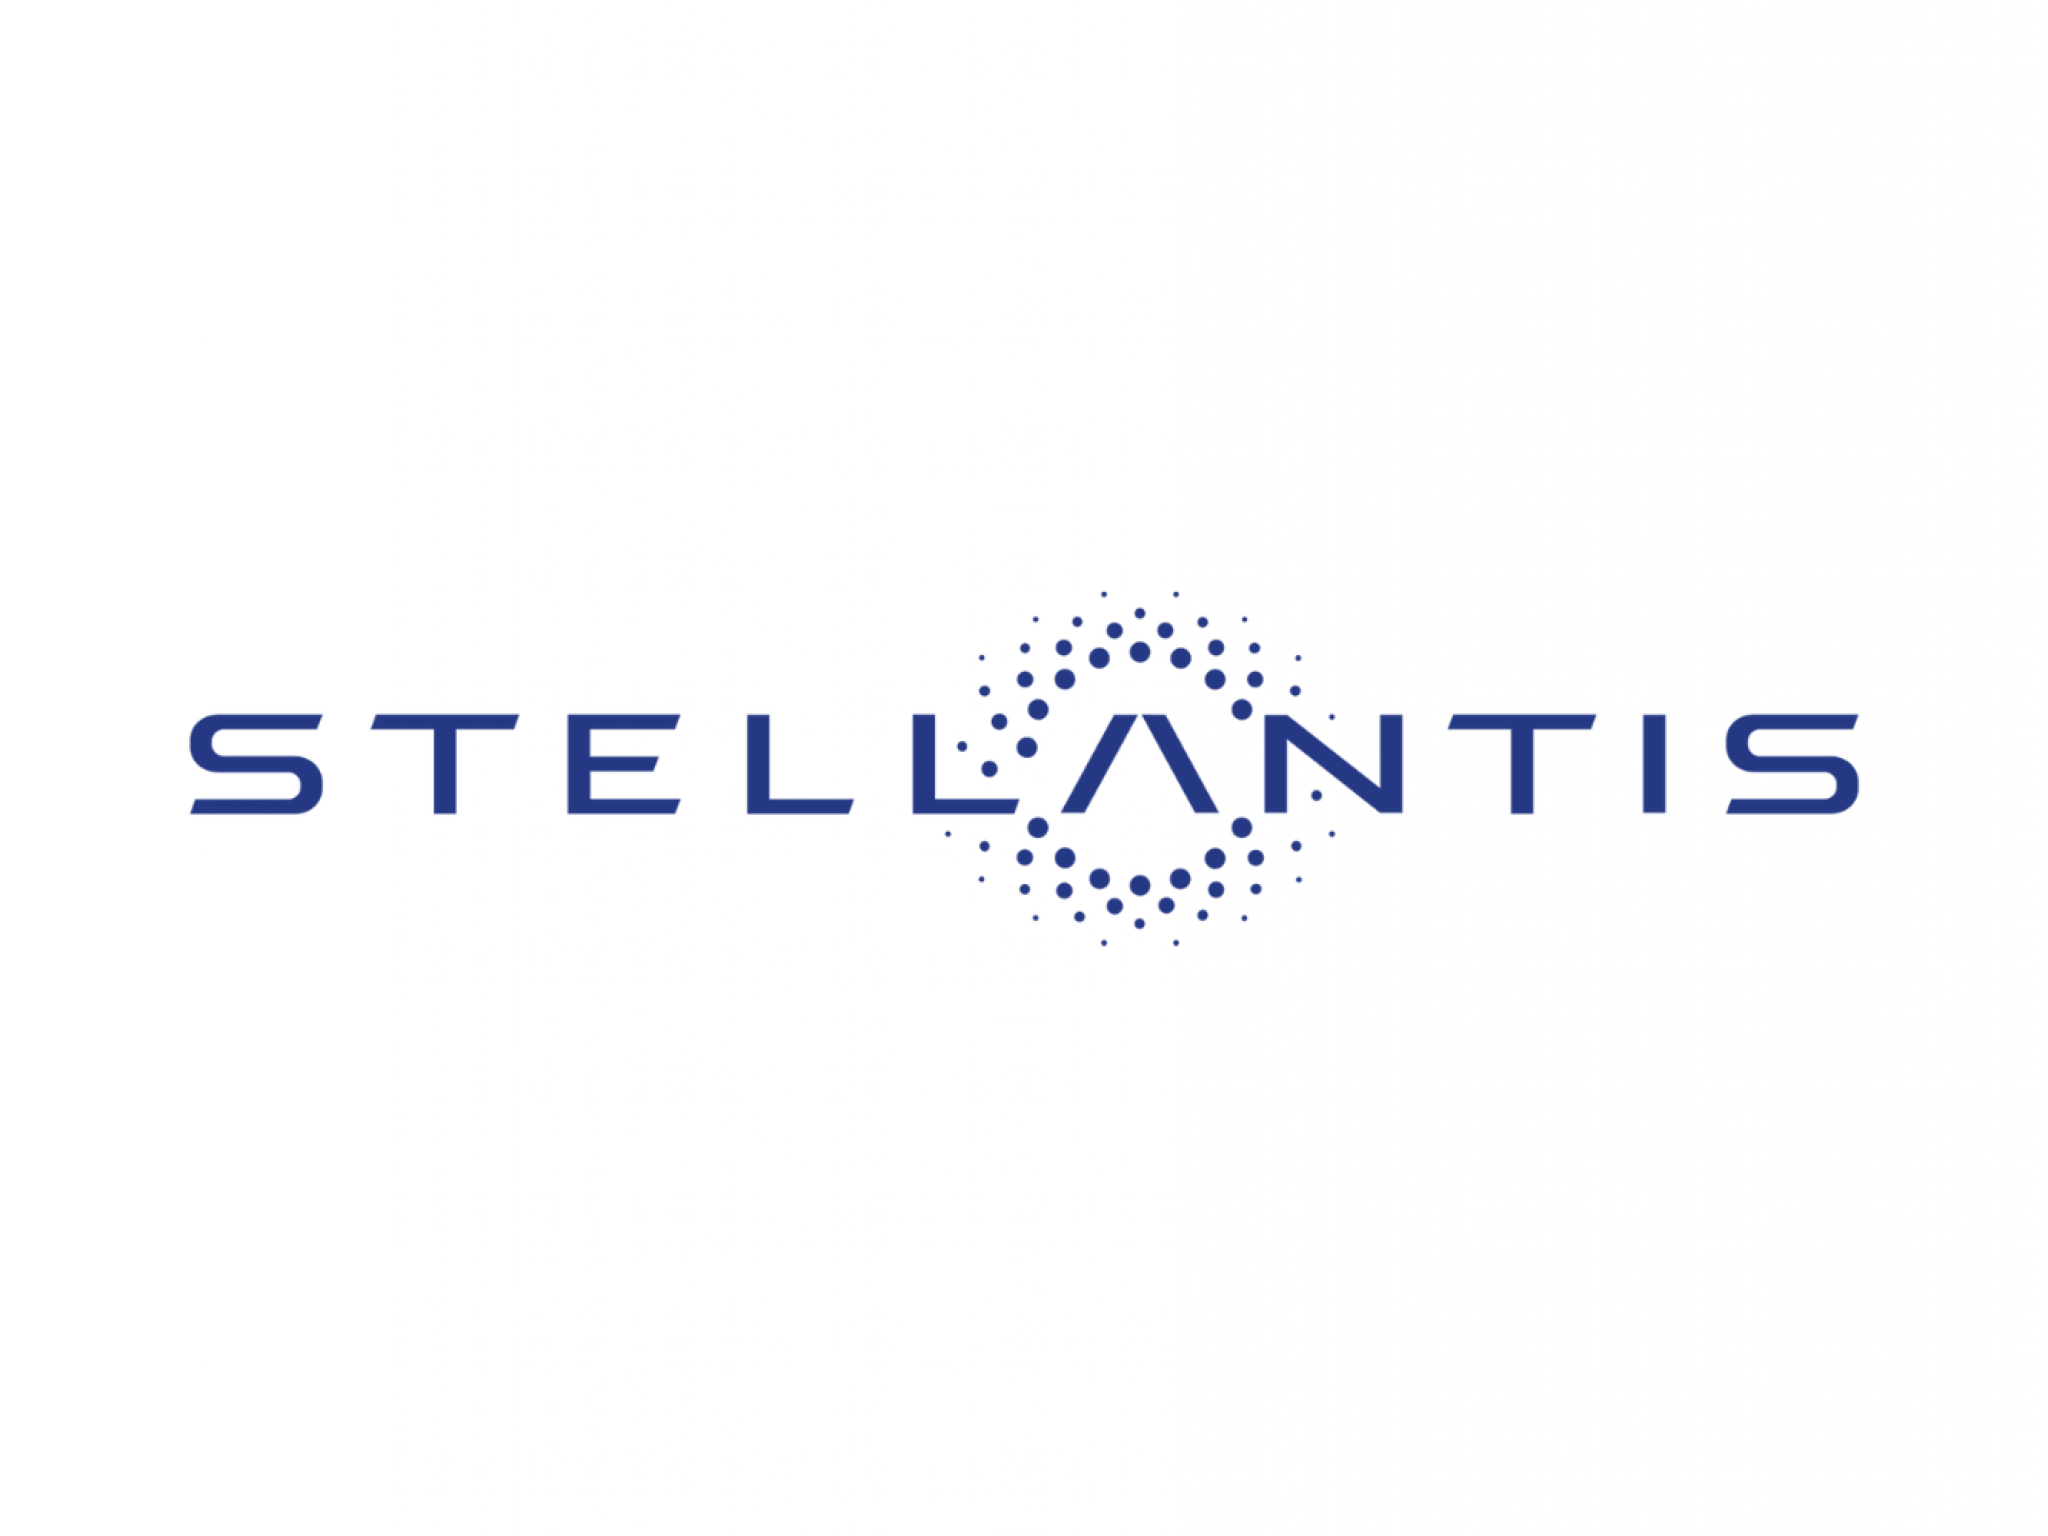  stellantis-unveils-semiconductor-strategy-to-gain-supply-security 